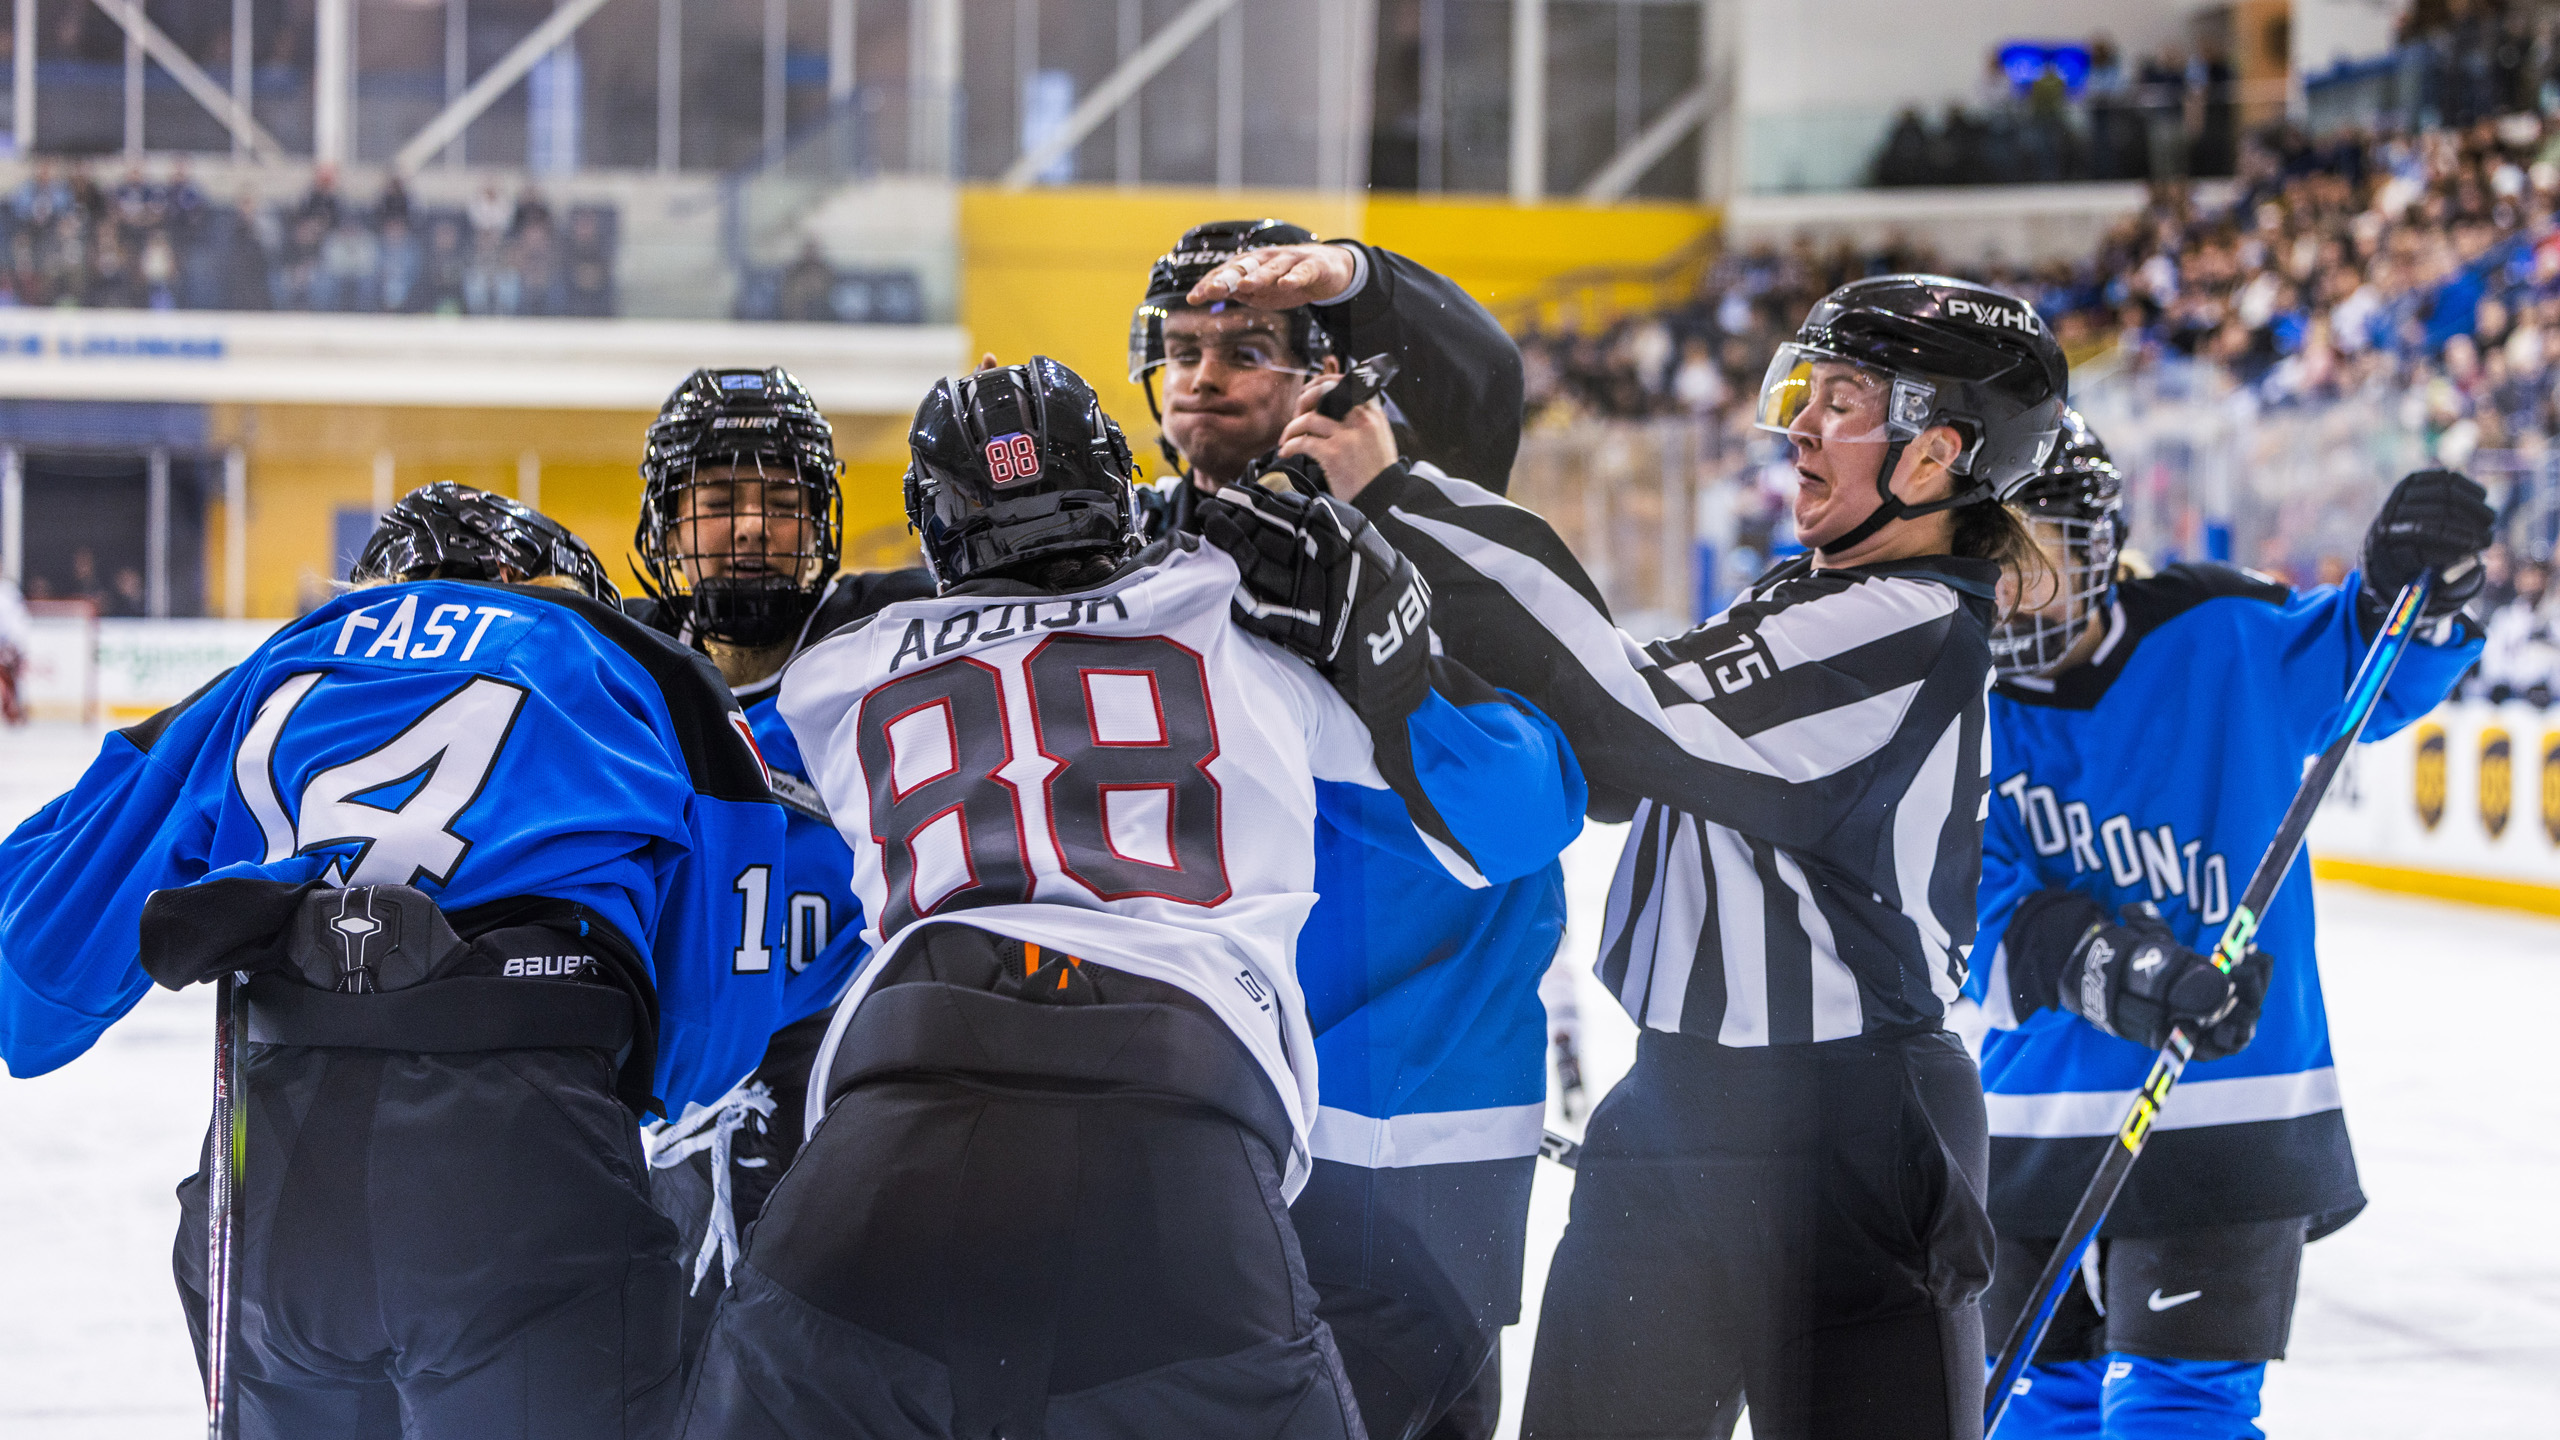 A post-whistle scrum breaks out between PWHL Ottawa and PWHL Toronto